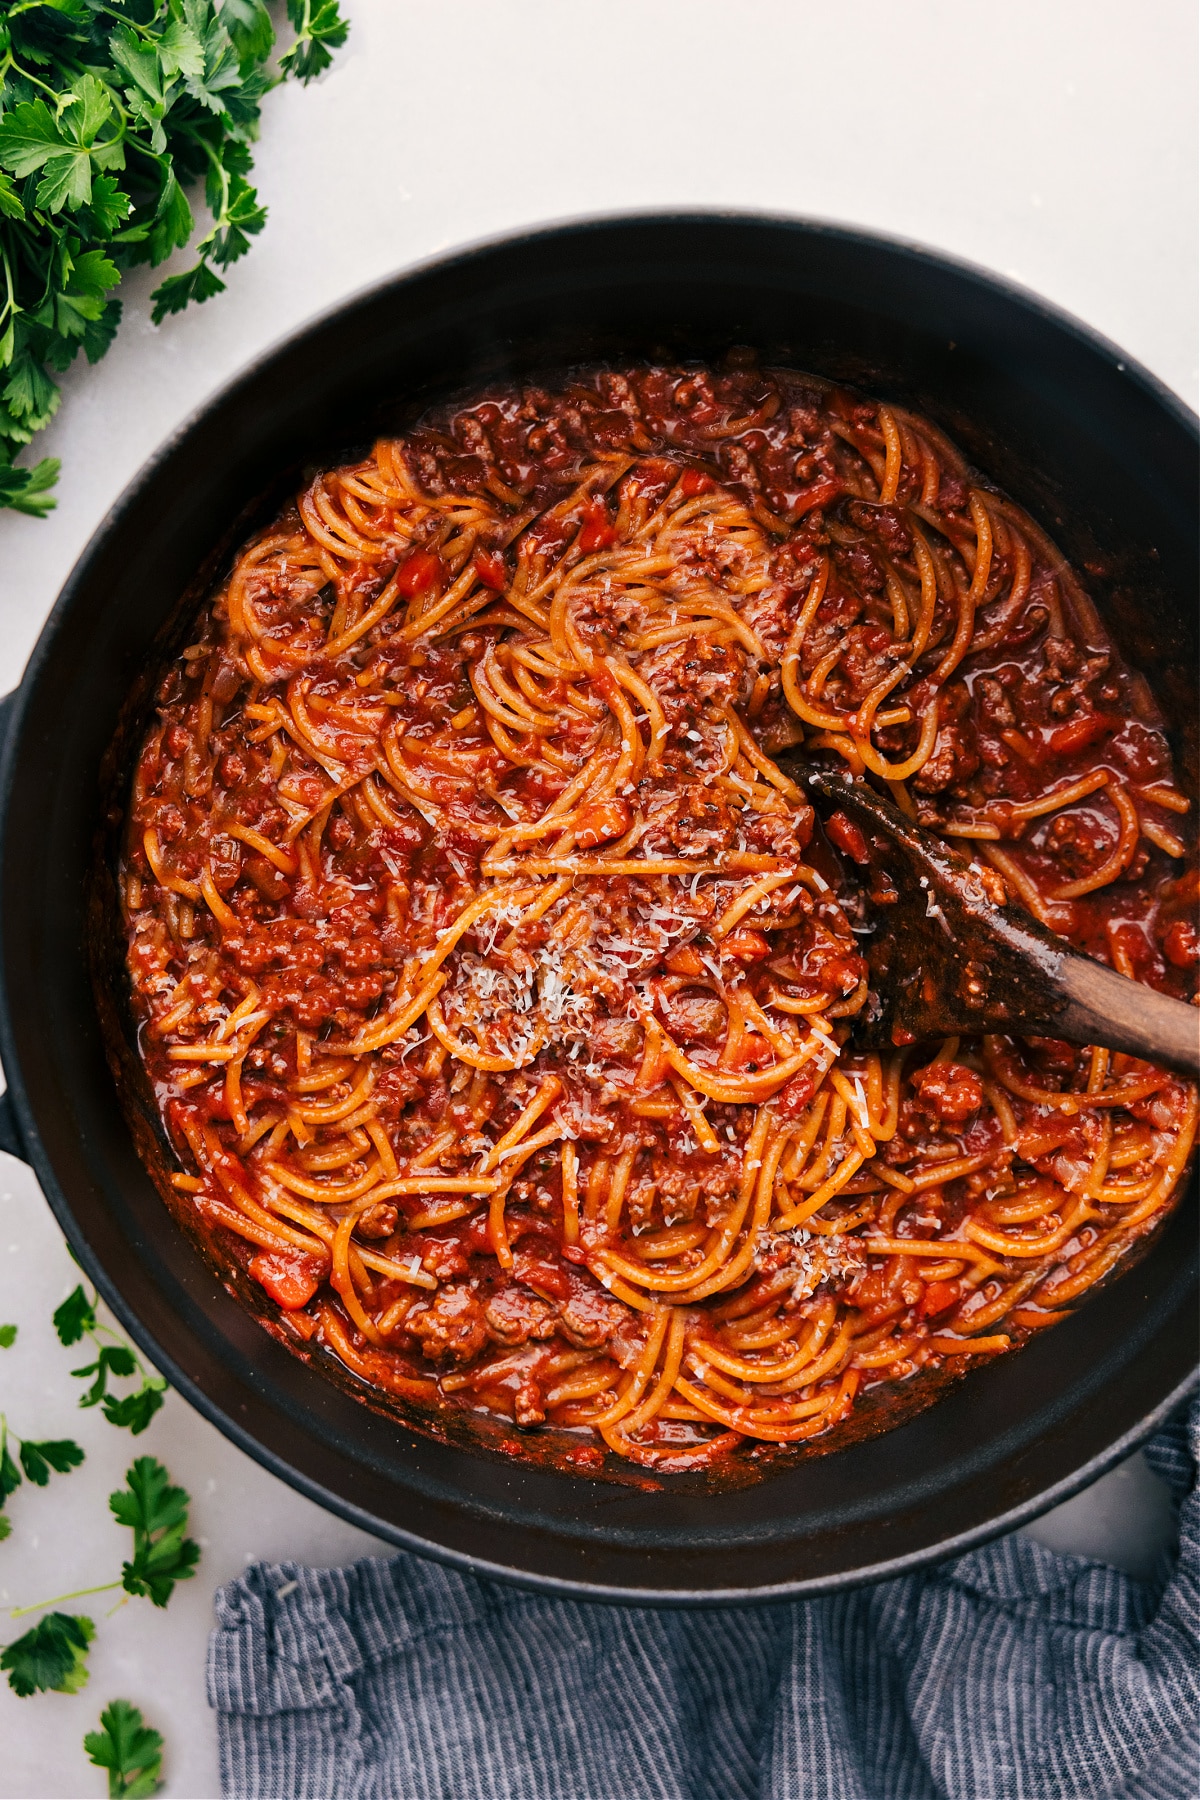 One Pot Spaghetti freshly cooked in the pot.